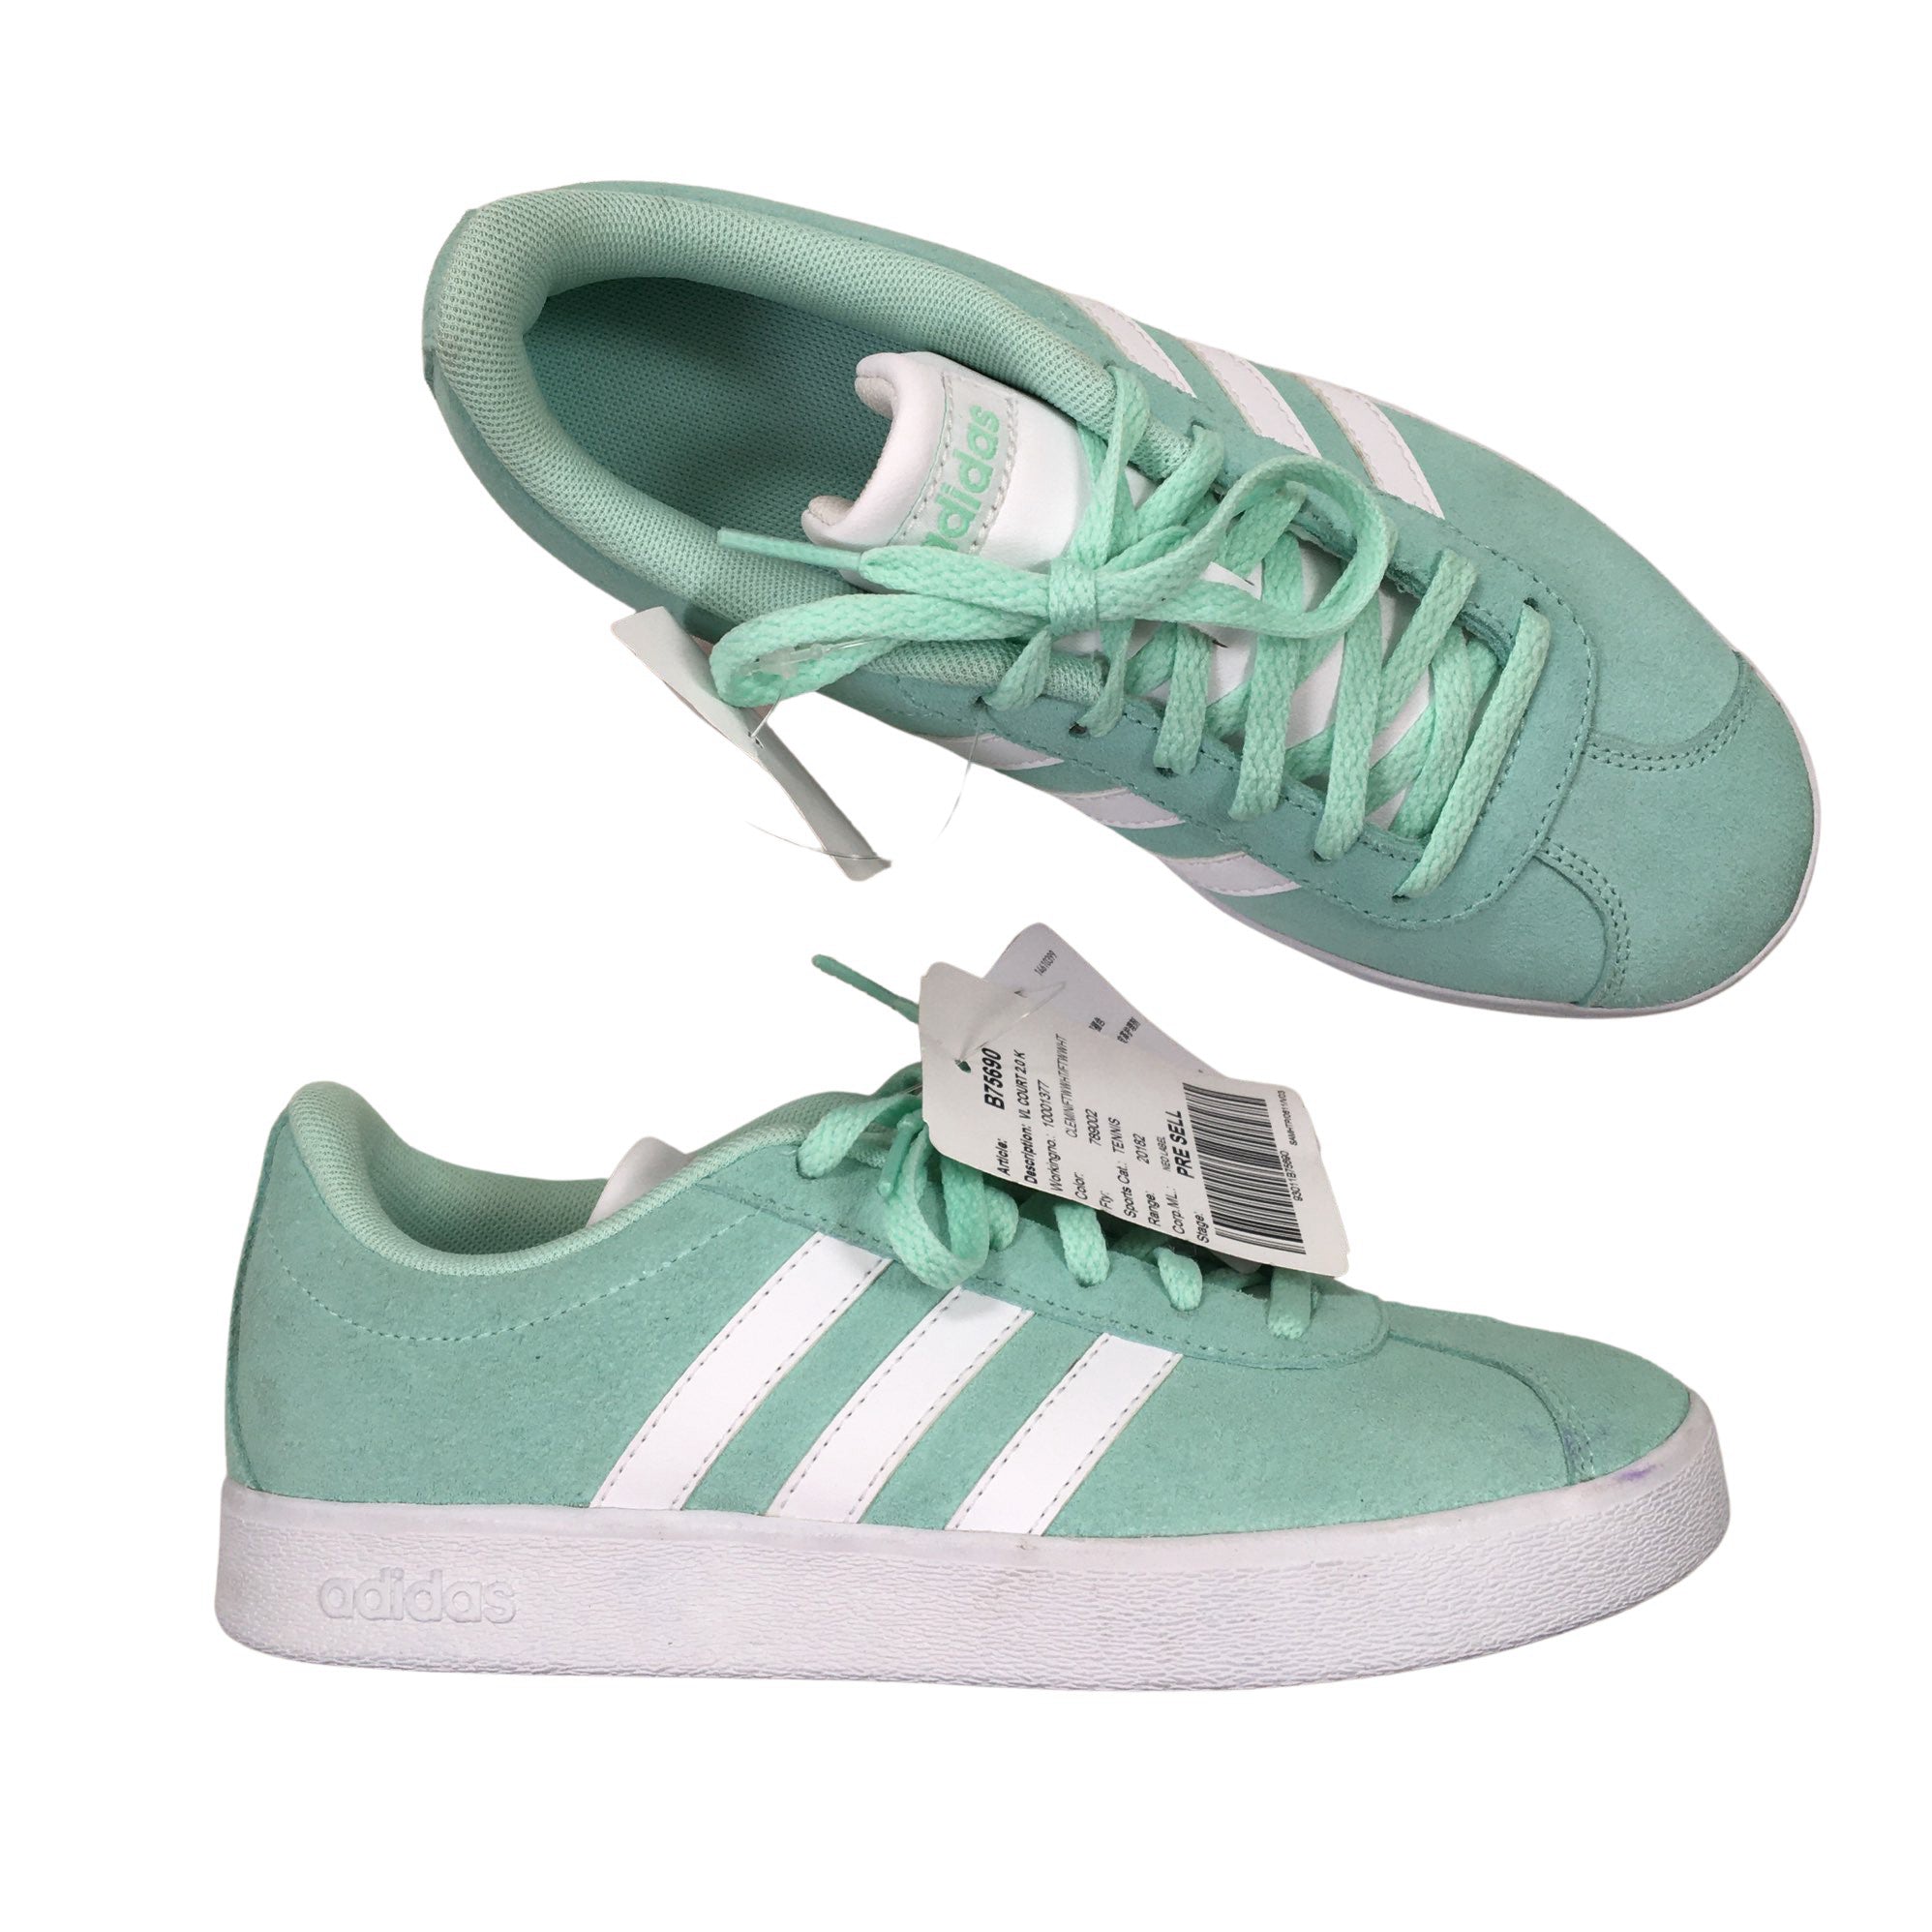 Unisex Adidas Casual sneakers, size 35 (Green) Emmy